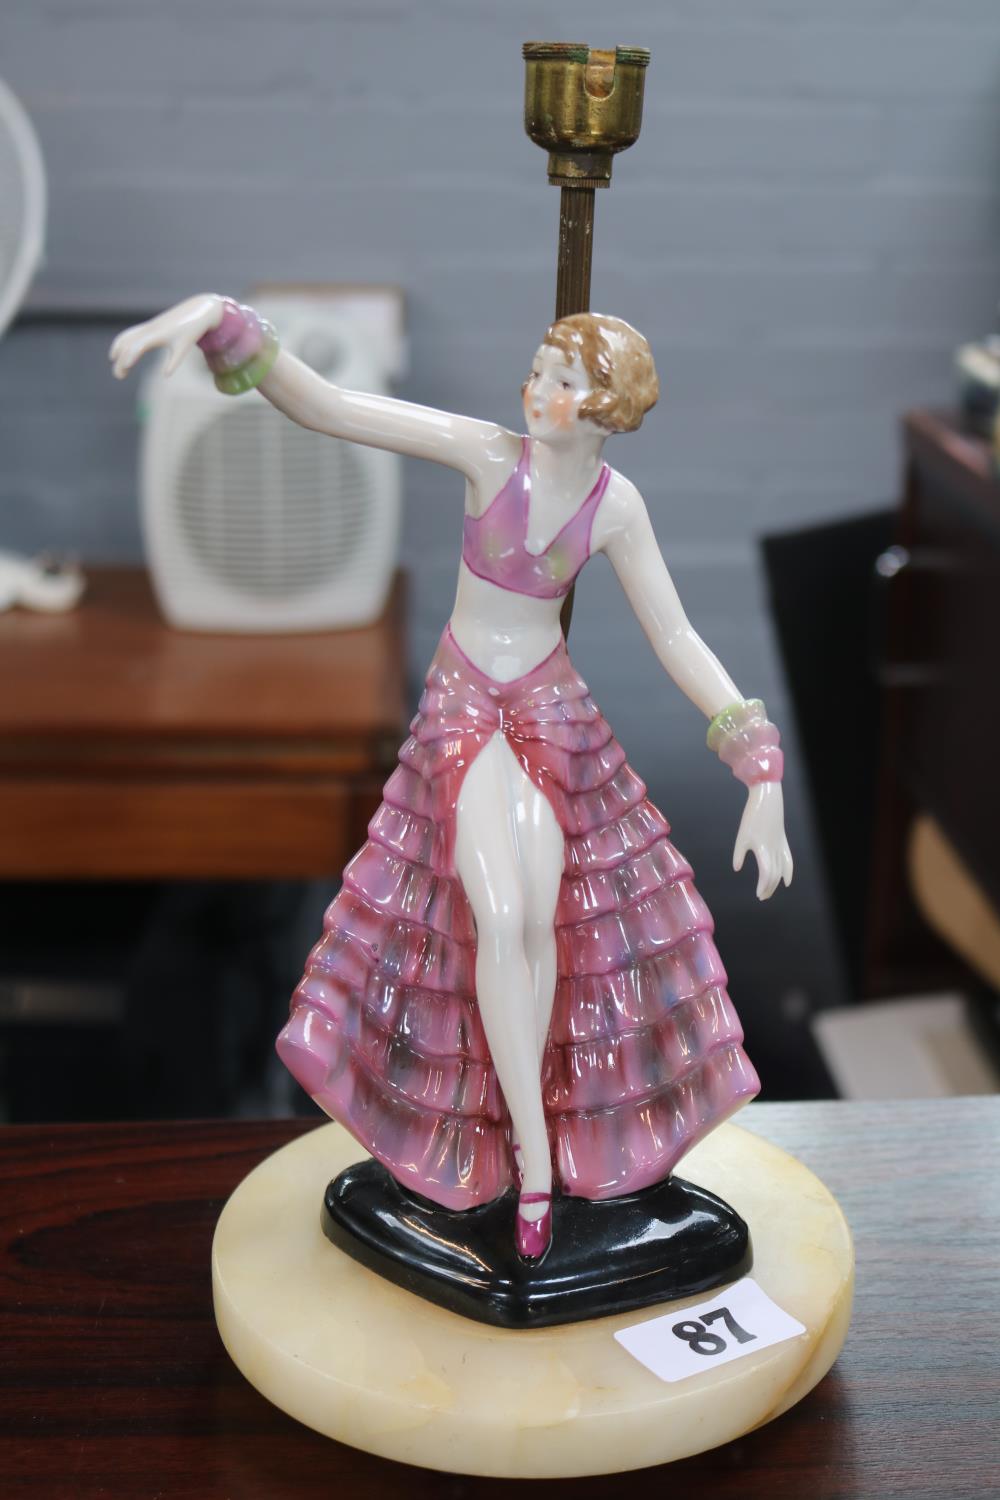 Art Deco Fasold & Stuch Bock Wallendorf German porcelain figurine mounted on Onyx Lamp base with